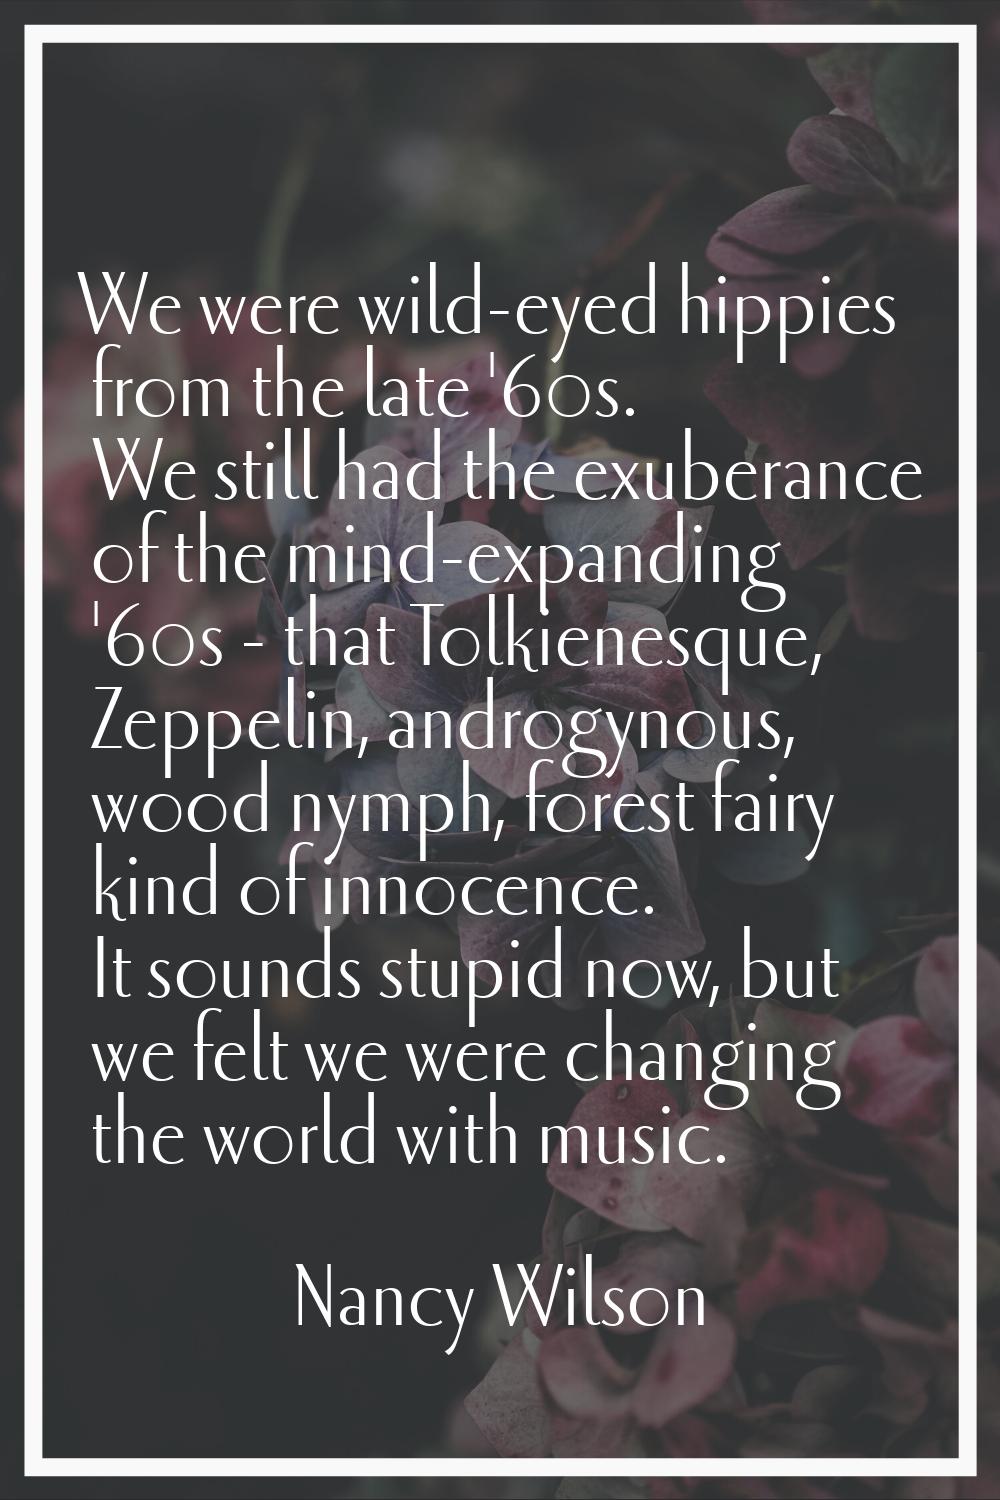 We were wild-eyed hippies from the late '60s. We still had the exuberance of the mind-expanding '60